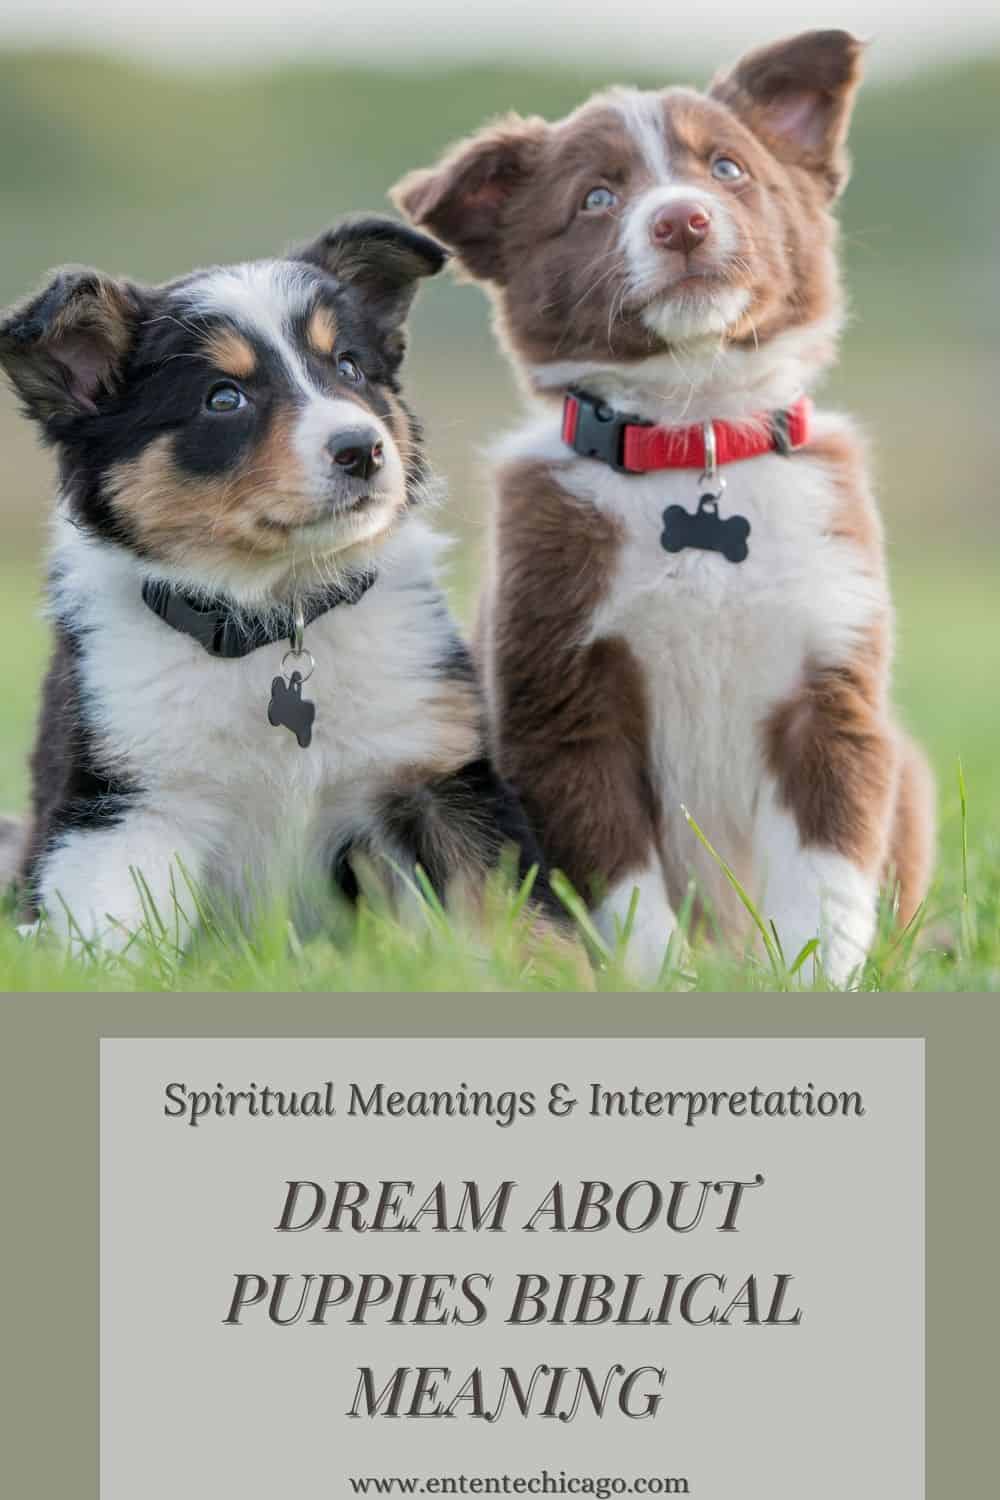 Dream About Puppies Biblical Meaning (Spiritual Meanings Interpretation)